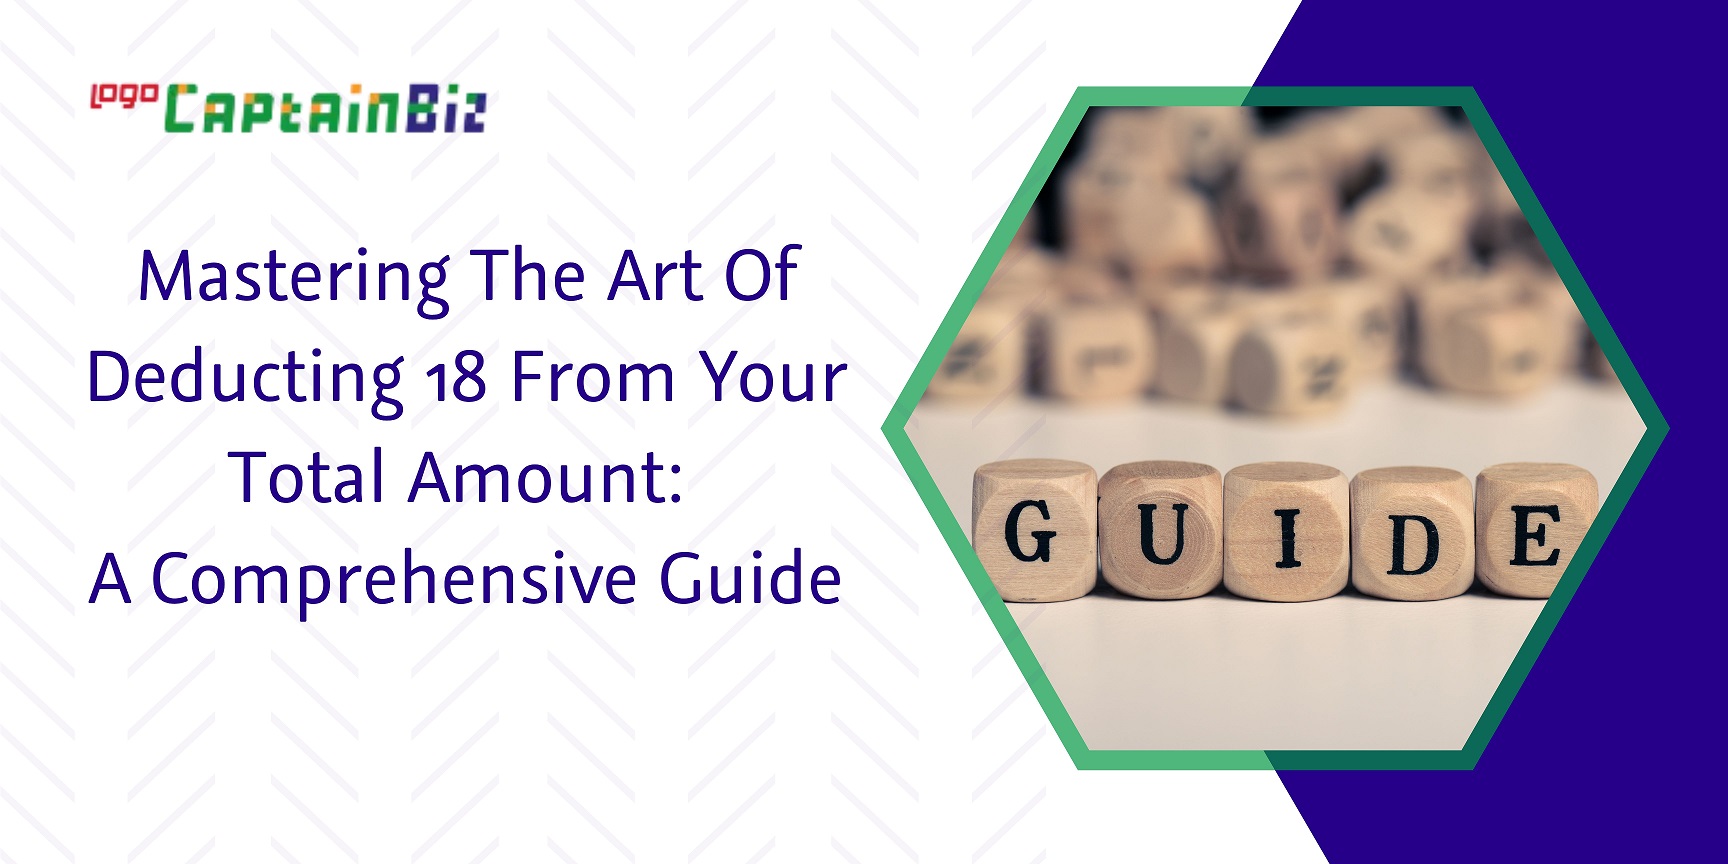 CaptainBiz: mastering the art of deducting 18 from your total amount a comprehensive guide